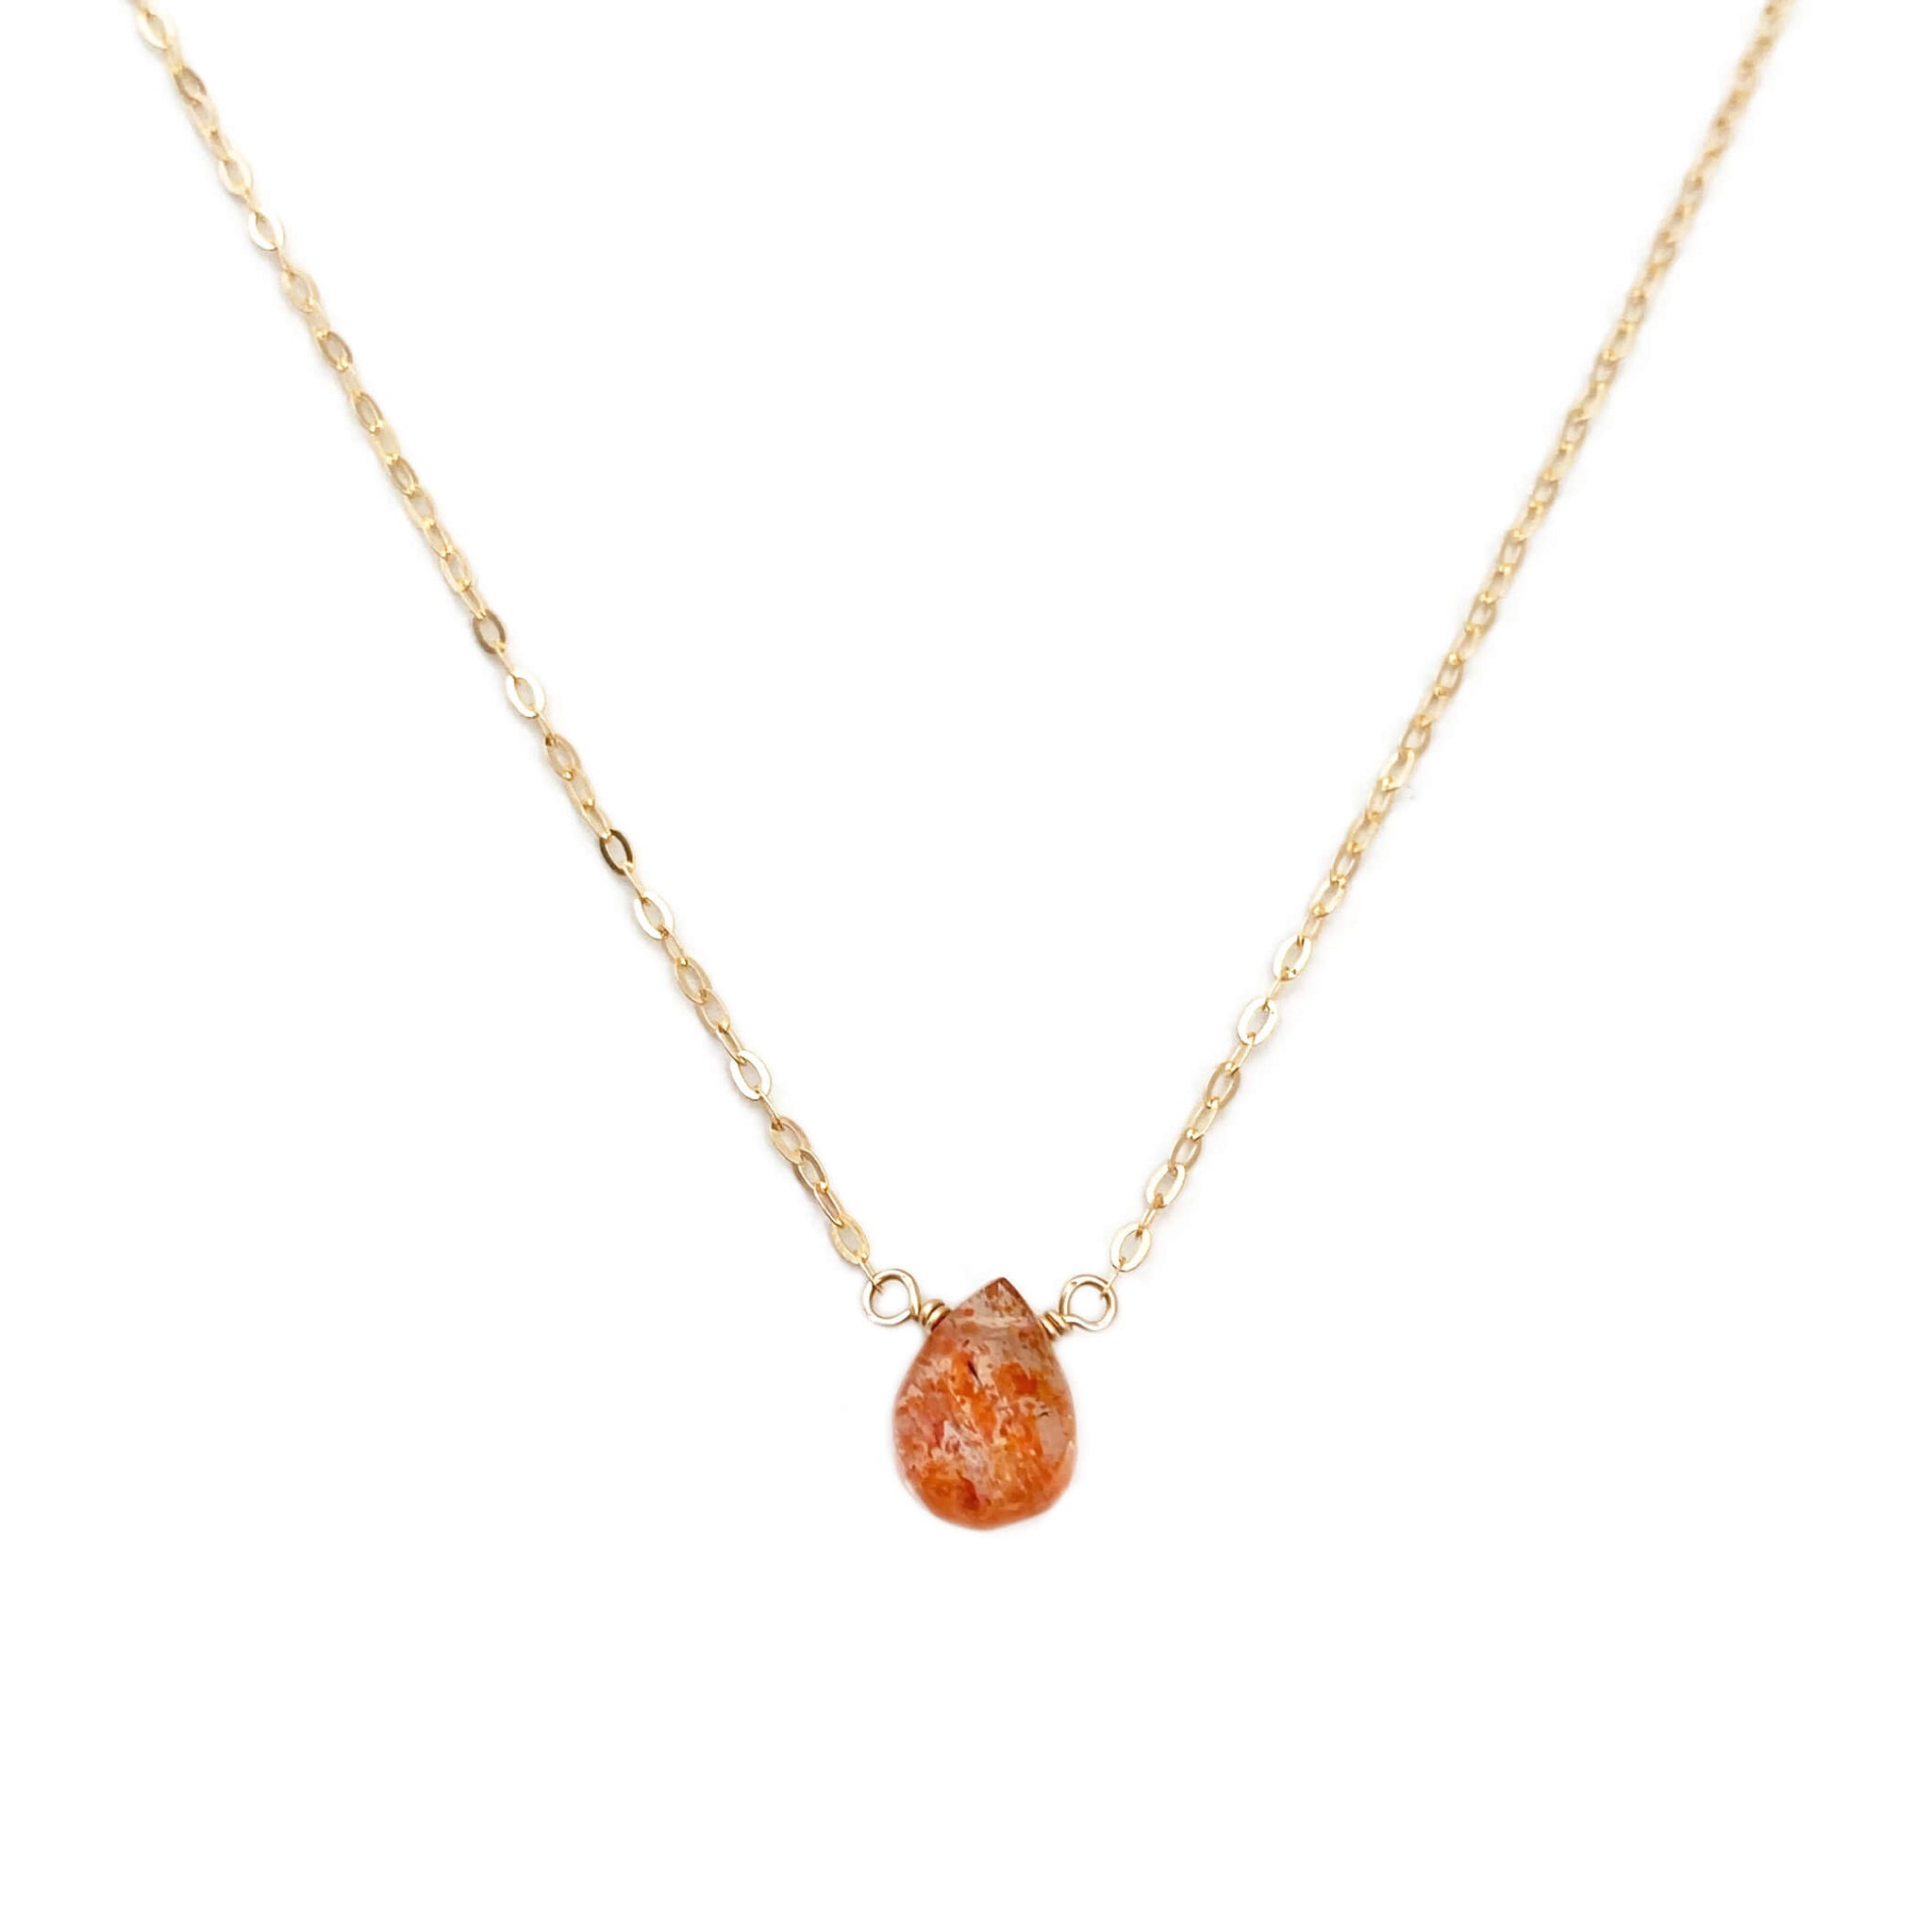 This Oregon sunstone necklace is made with a single hand-picked sunstone, a gem that is known for its glittery effect, and this dainty necklace is perfect for a casual look. 